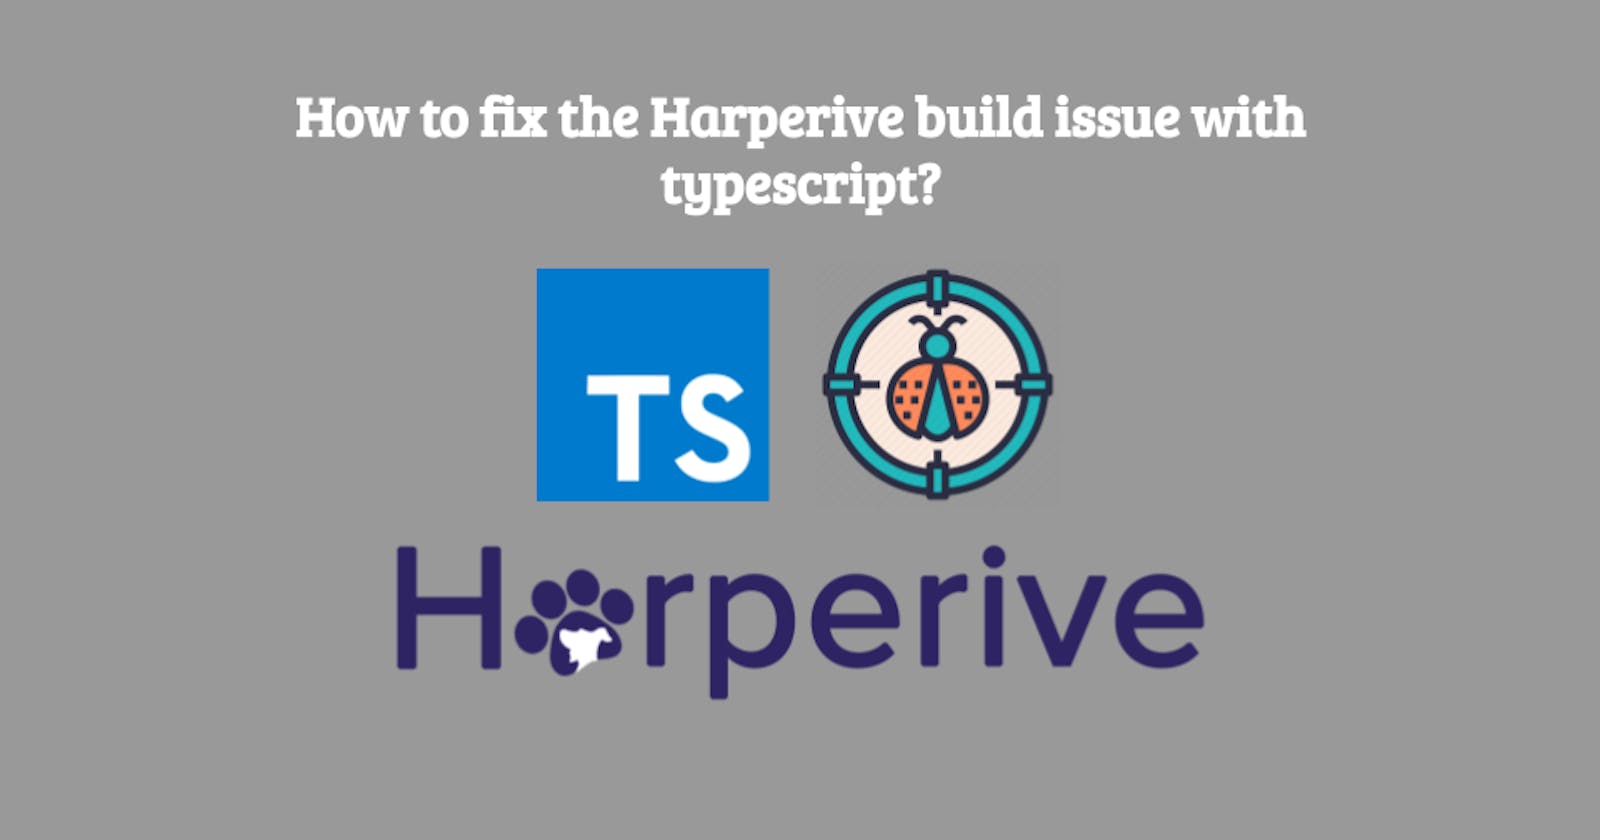 How to fix the Harperive build issue with typescript?